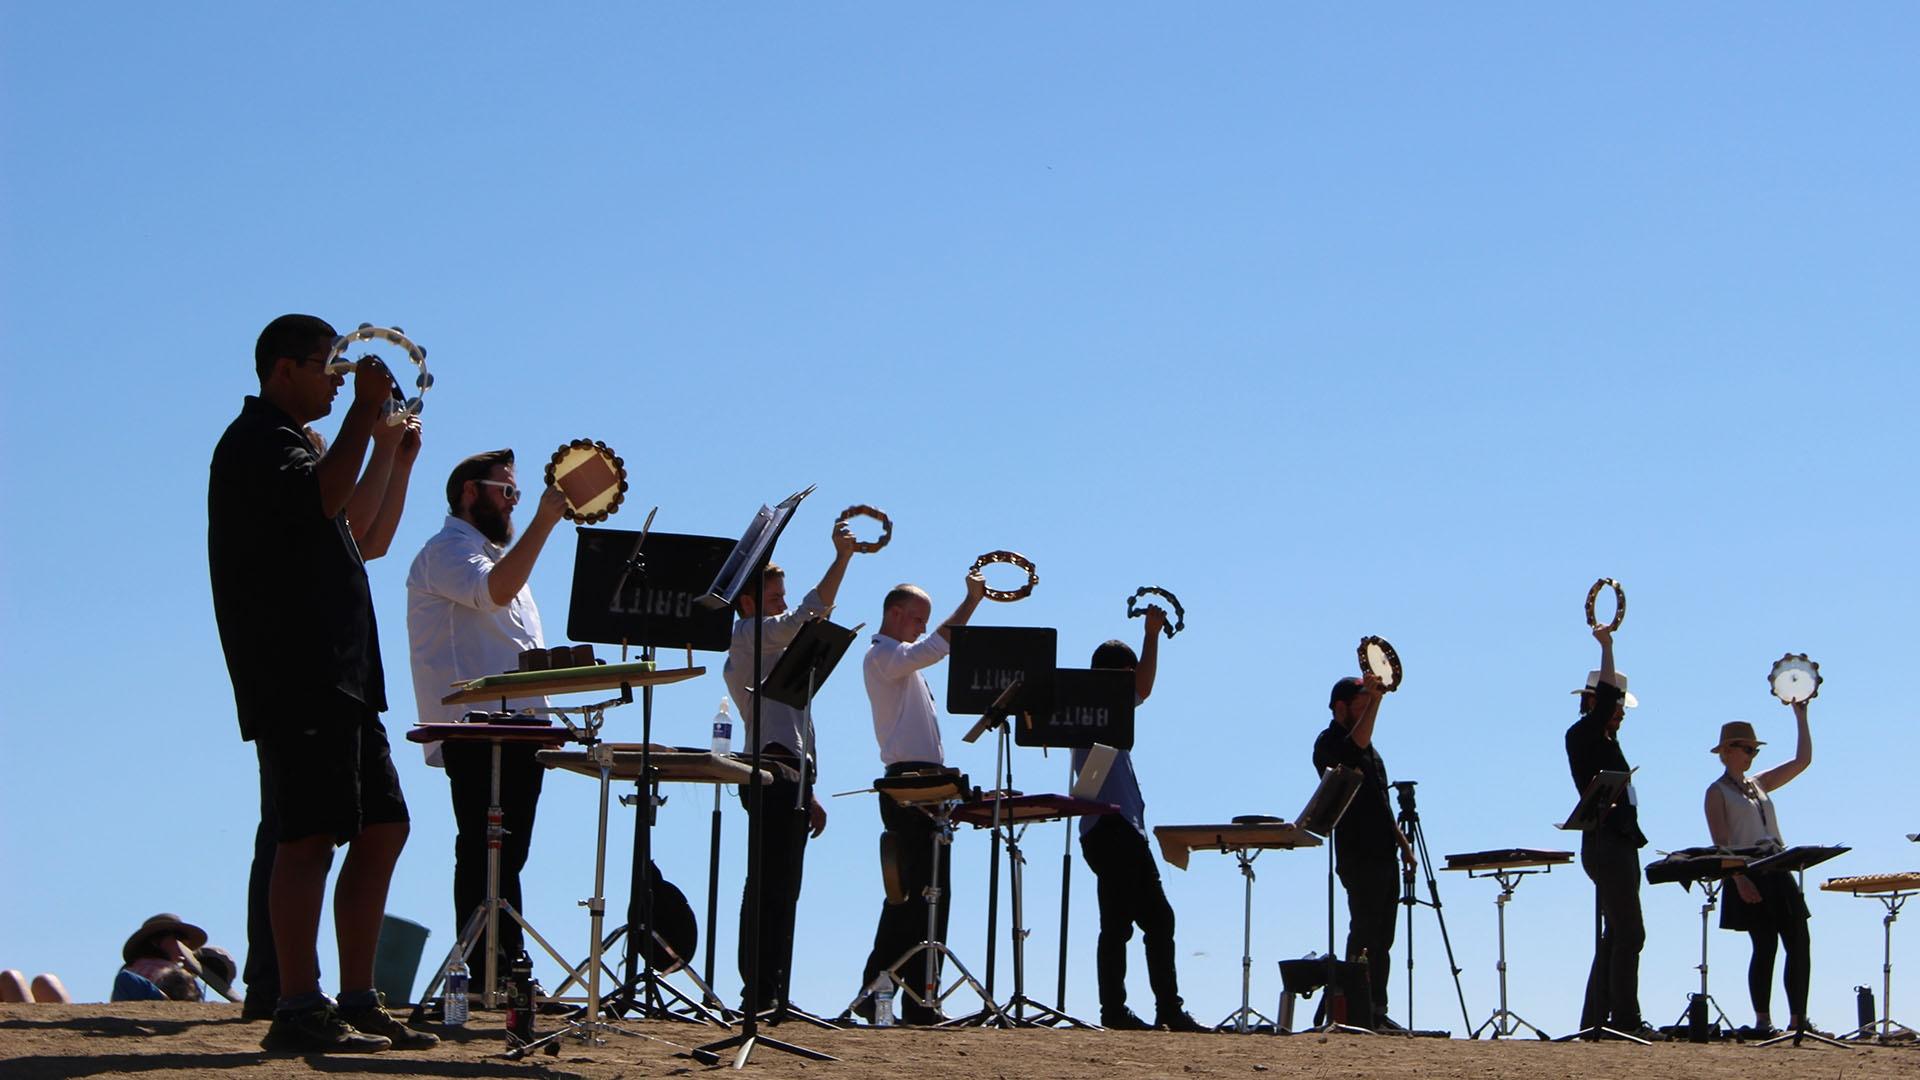 Tambourine players perform “Natural History” at the edge of Crater Lake